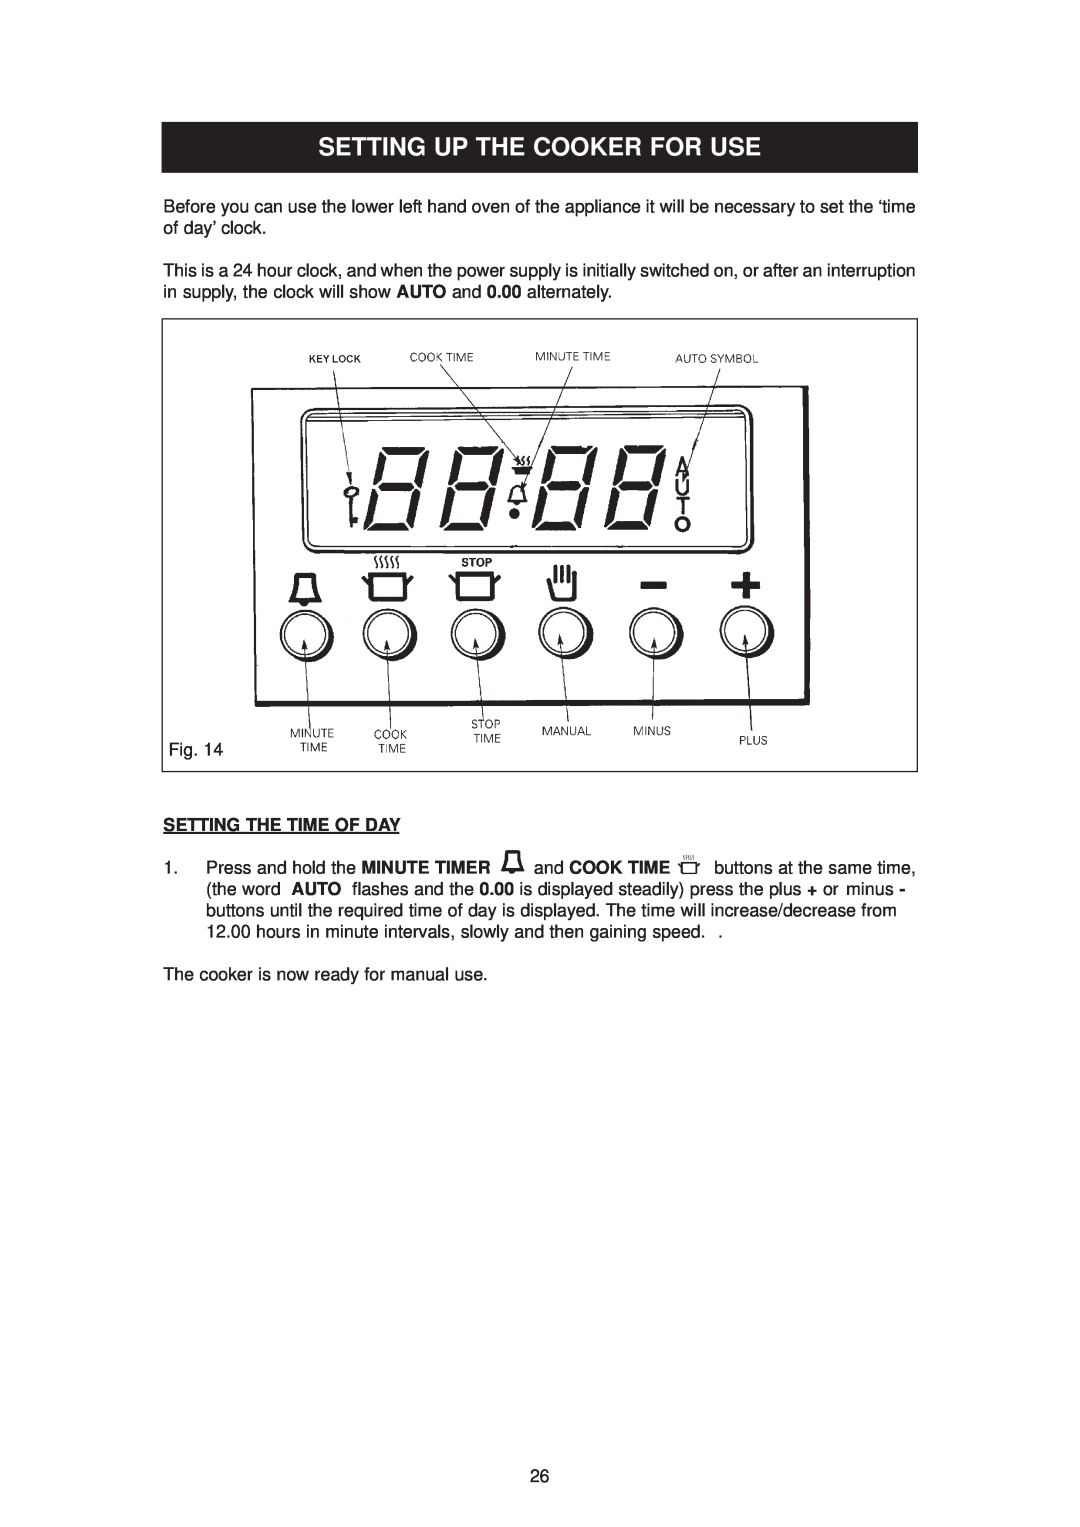 Aga Ranges dc6 owner manual Setting Up The Cooker For Use, Setting The Time Of Day 